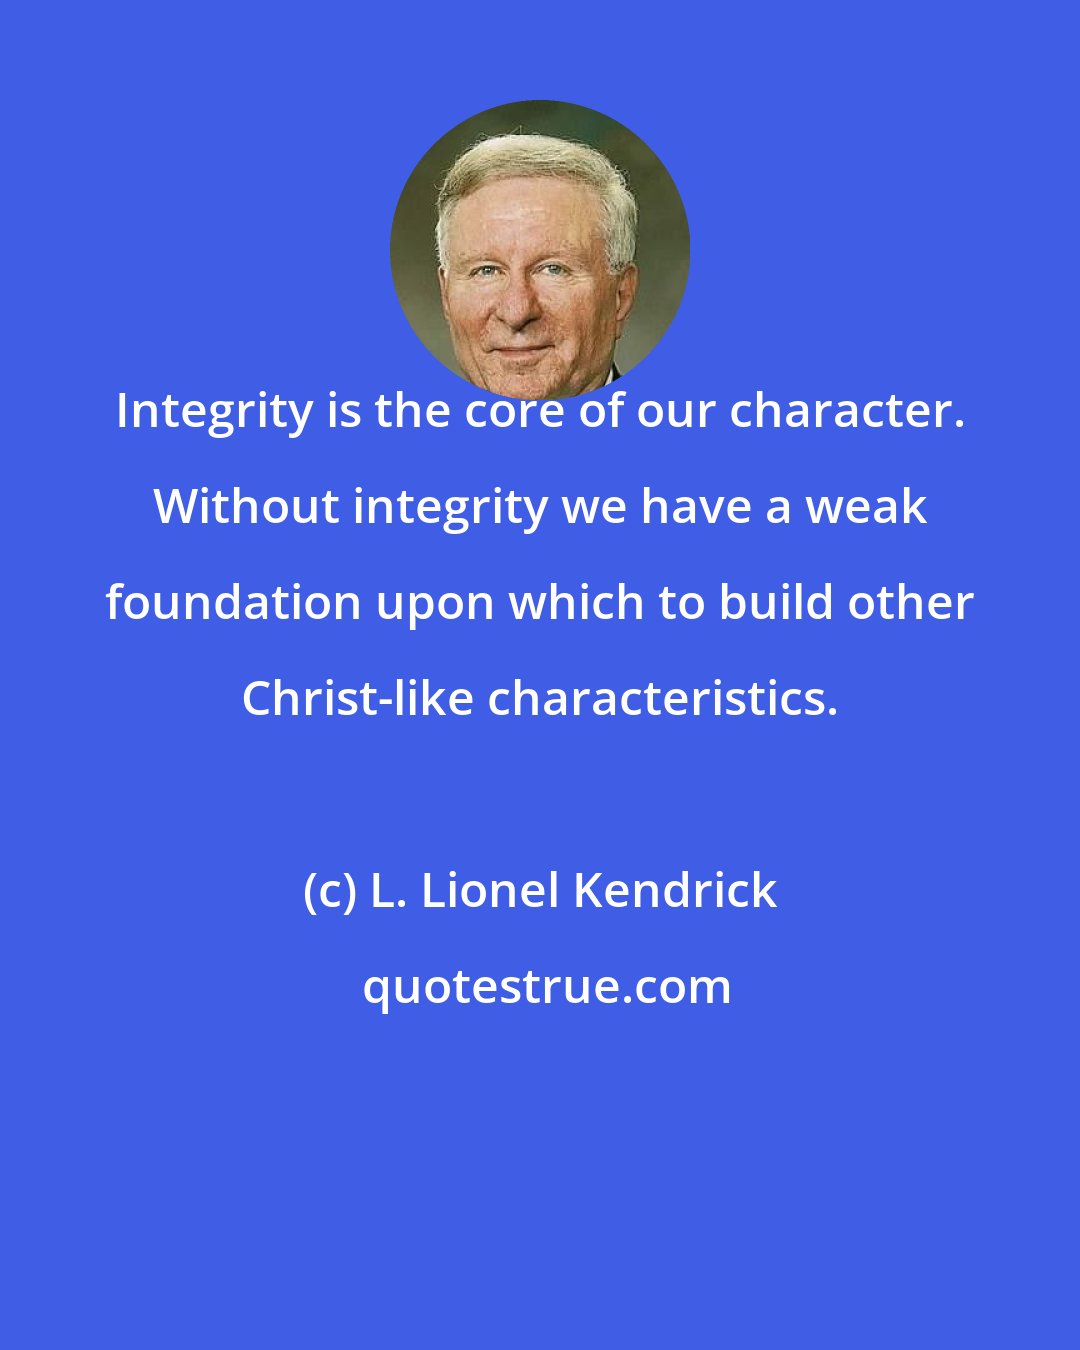 L. Lionel Kendrick: Integrity is the core of our character. Without integrity we have a weak foundation upon which to build other Christ-like characteristics.